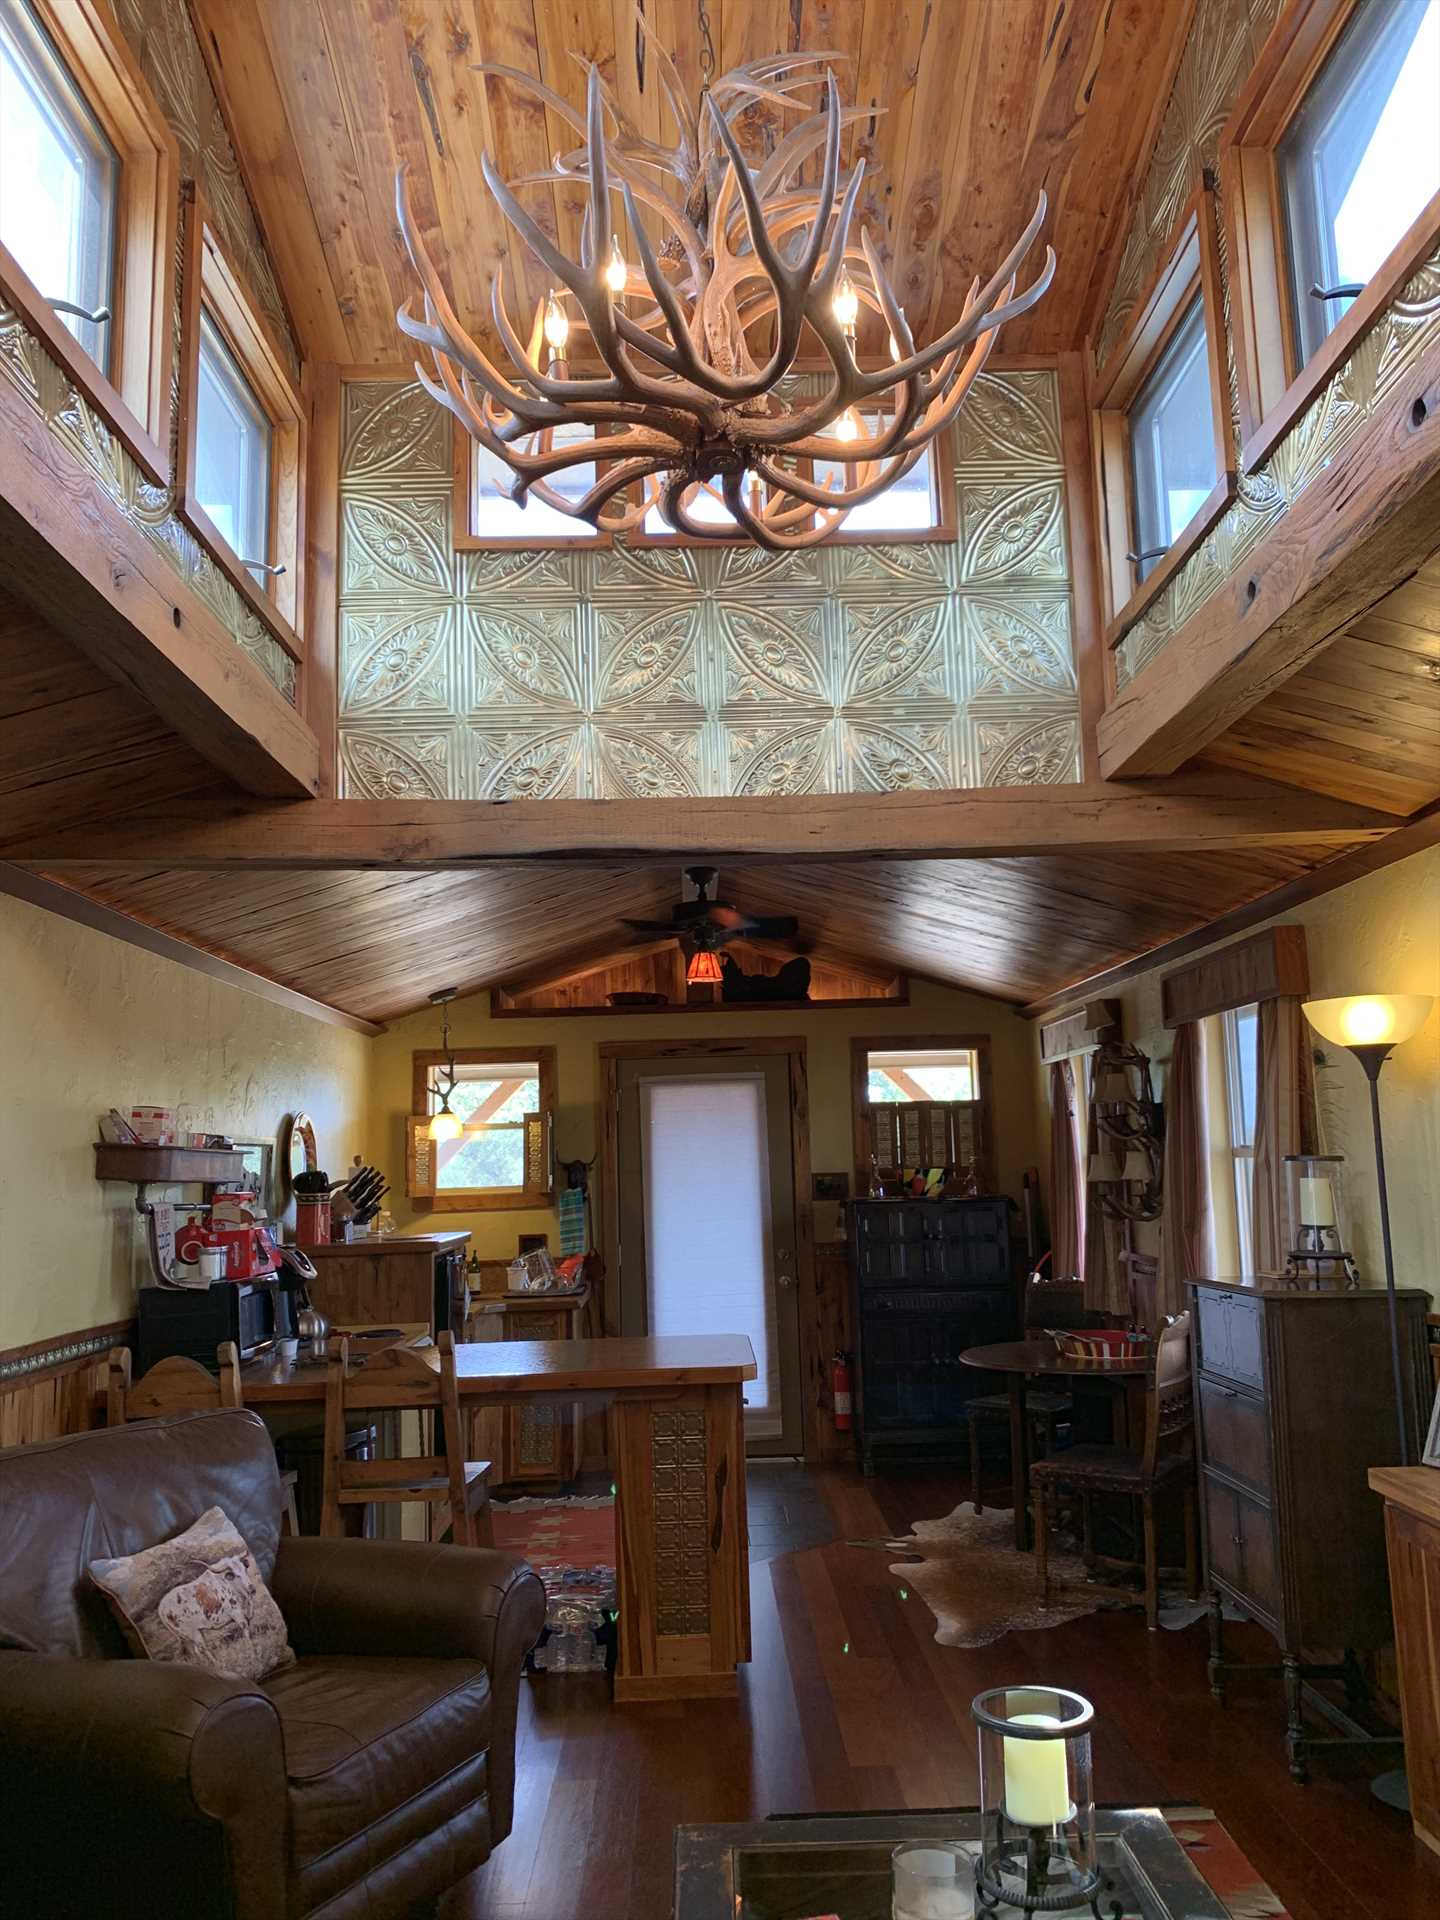                                                 The cabin's namesake antler chandelier is framed by high ceilings, tin panels, rich woodwork, and plenty of natural light.